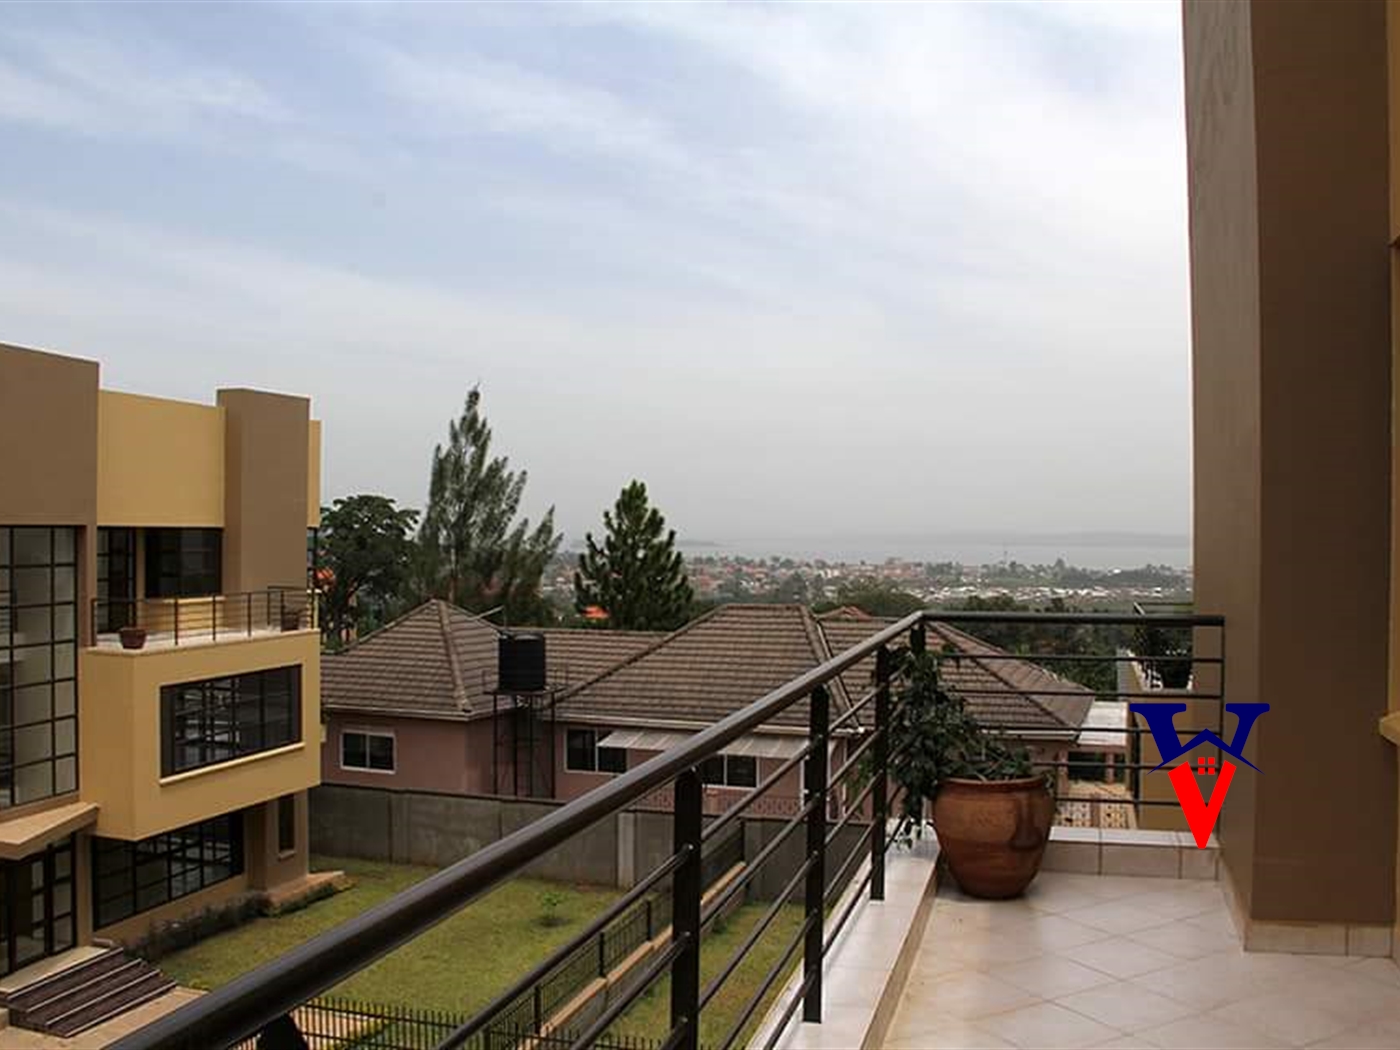 Town House for rent in Buziga Kampala